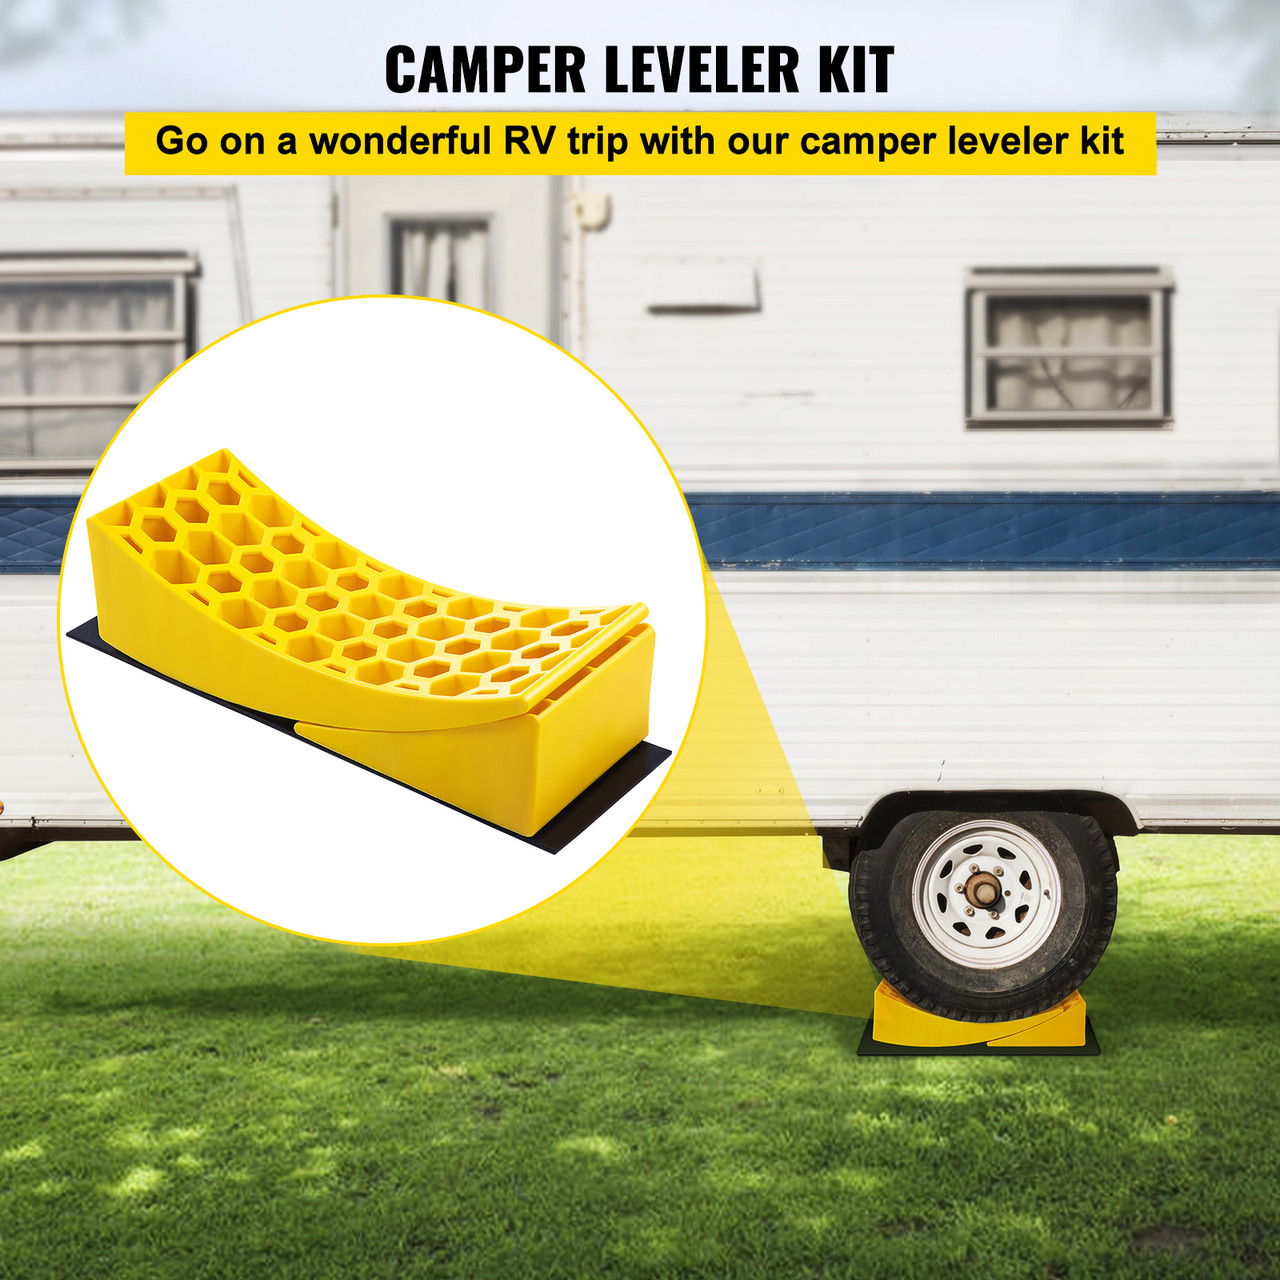 Camper Leveler, 2 Pack RV Leveling Blocks, HDPE Curved Levelers,Include 2 Curved Levelers,2 Chocks,2 Rubber Grip Mats,Hold up to 35000 lbs,Fast and Precise Leveling for Camper RV Trailer